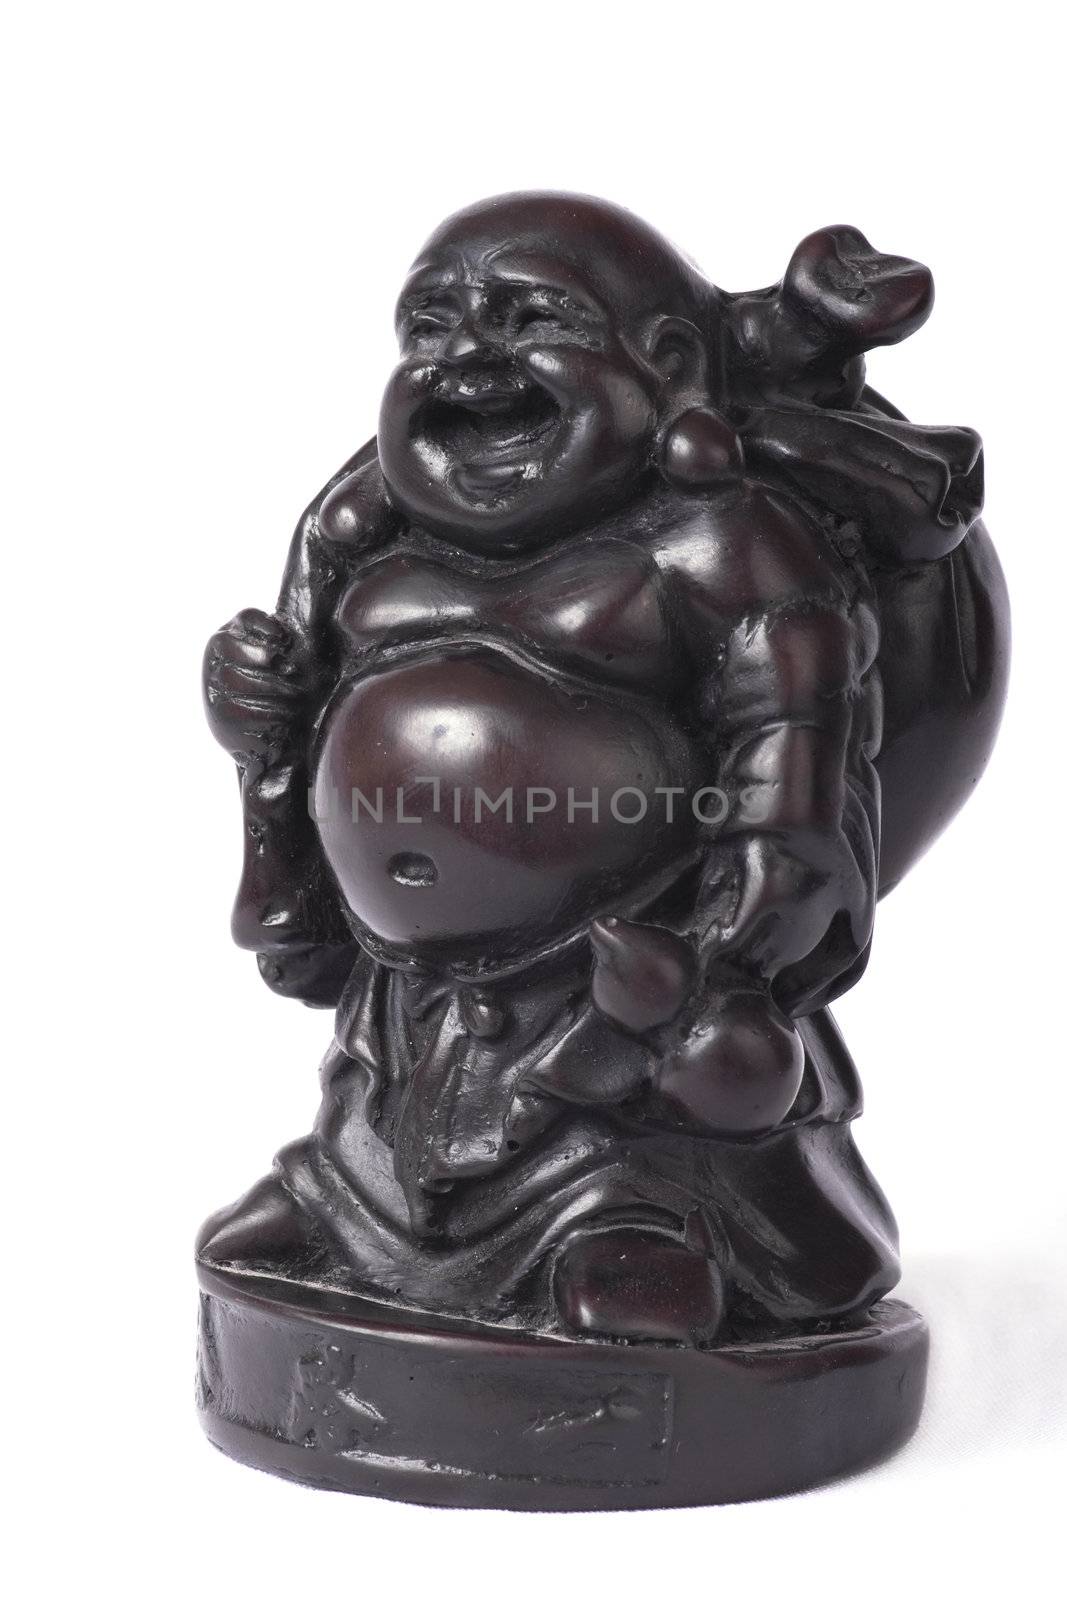 Chinese god statuette by Shpinat